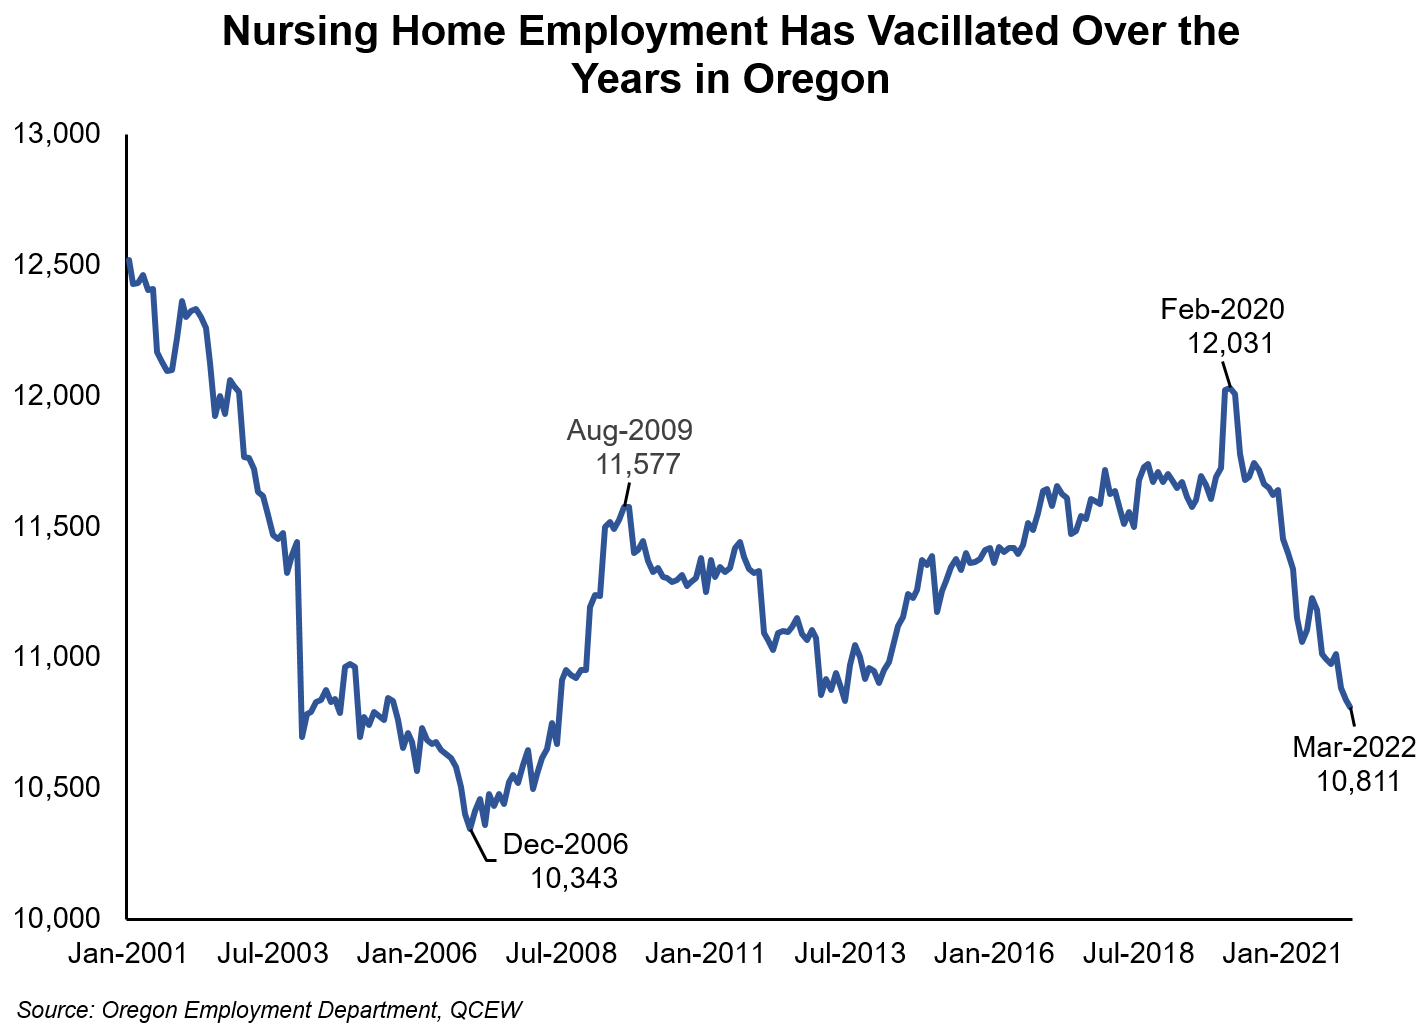 Graph showing nursing home employment has vacillated over the years in Oregon